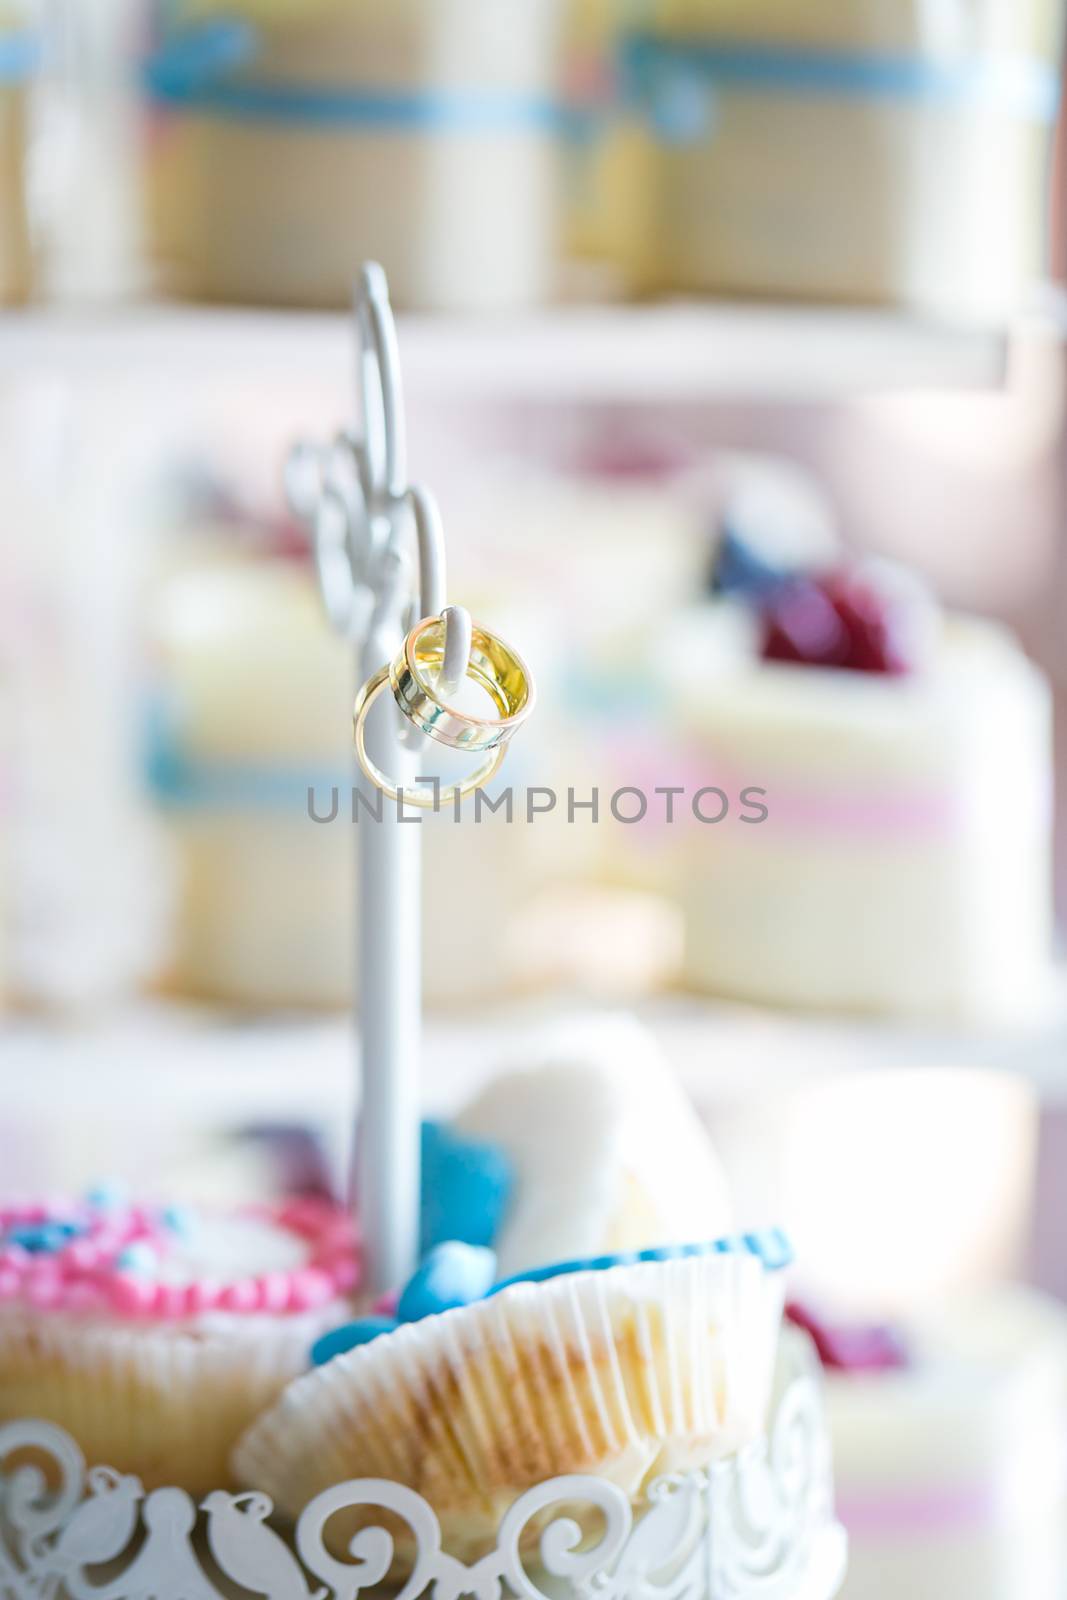 Wedding day details - two lovely golden wedding rings awaiting their moment